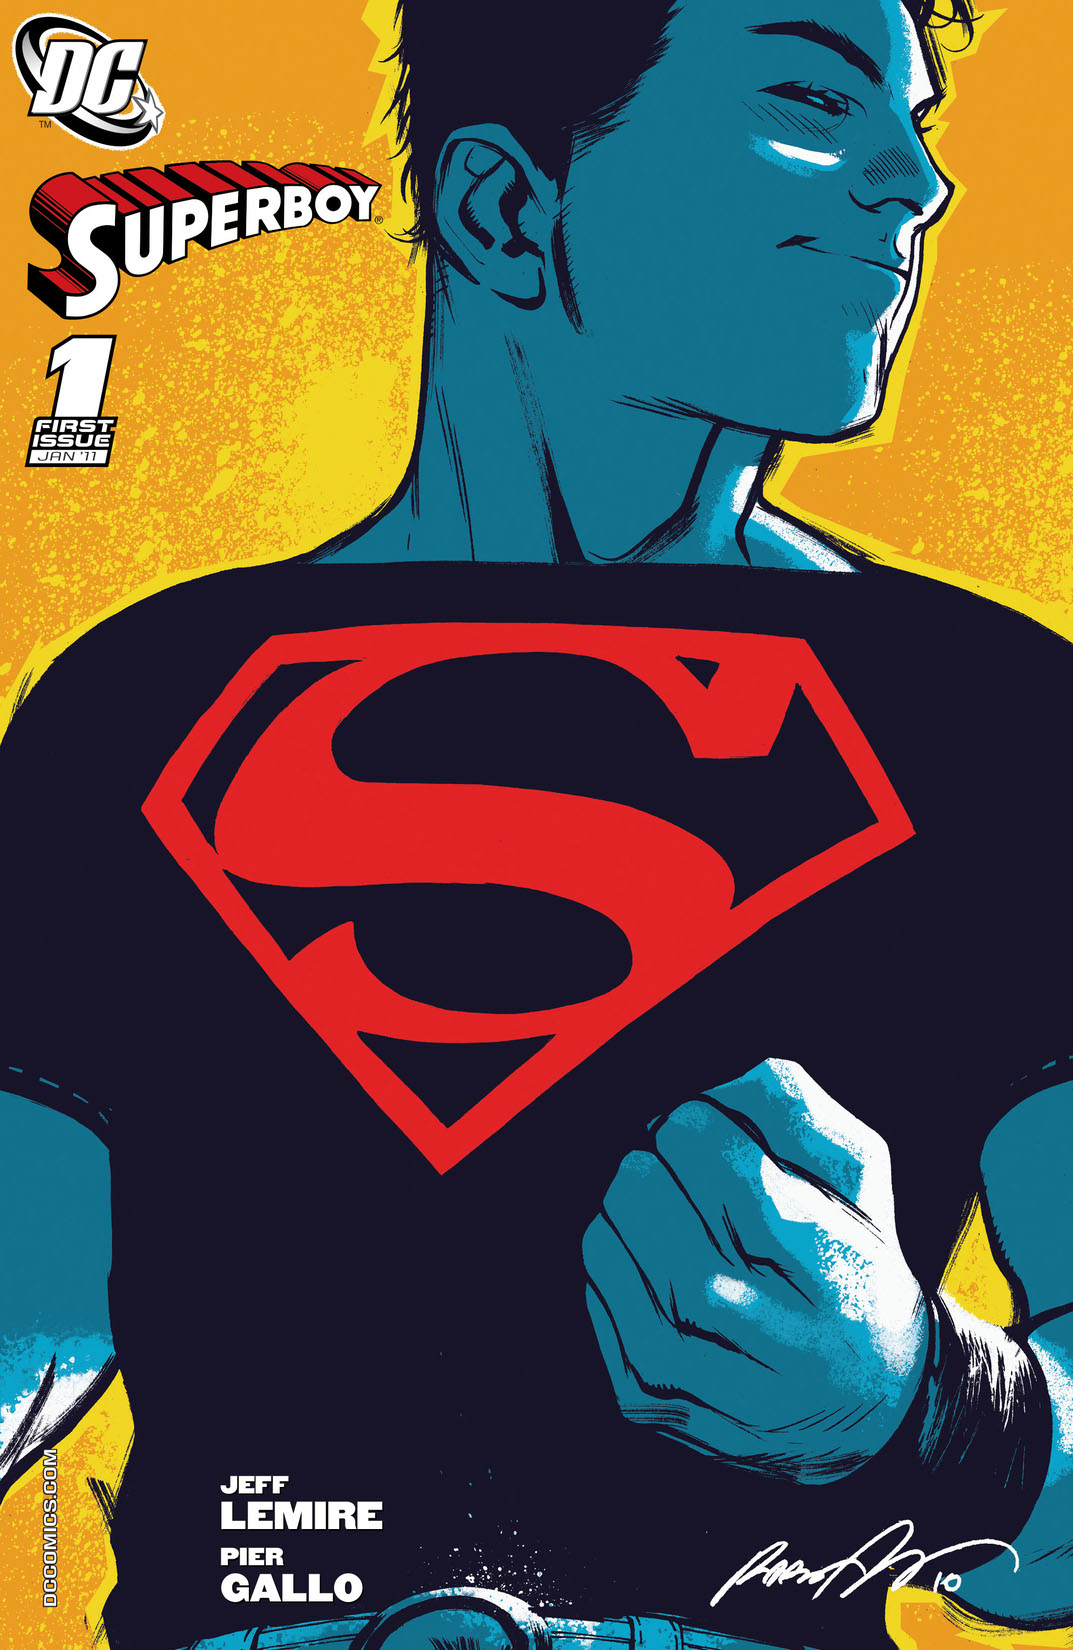 Superboy (2010-) #1 preview images